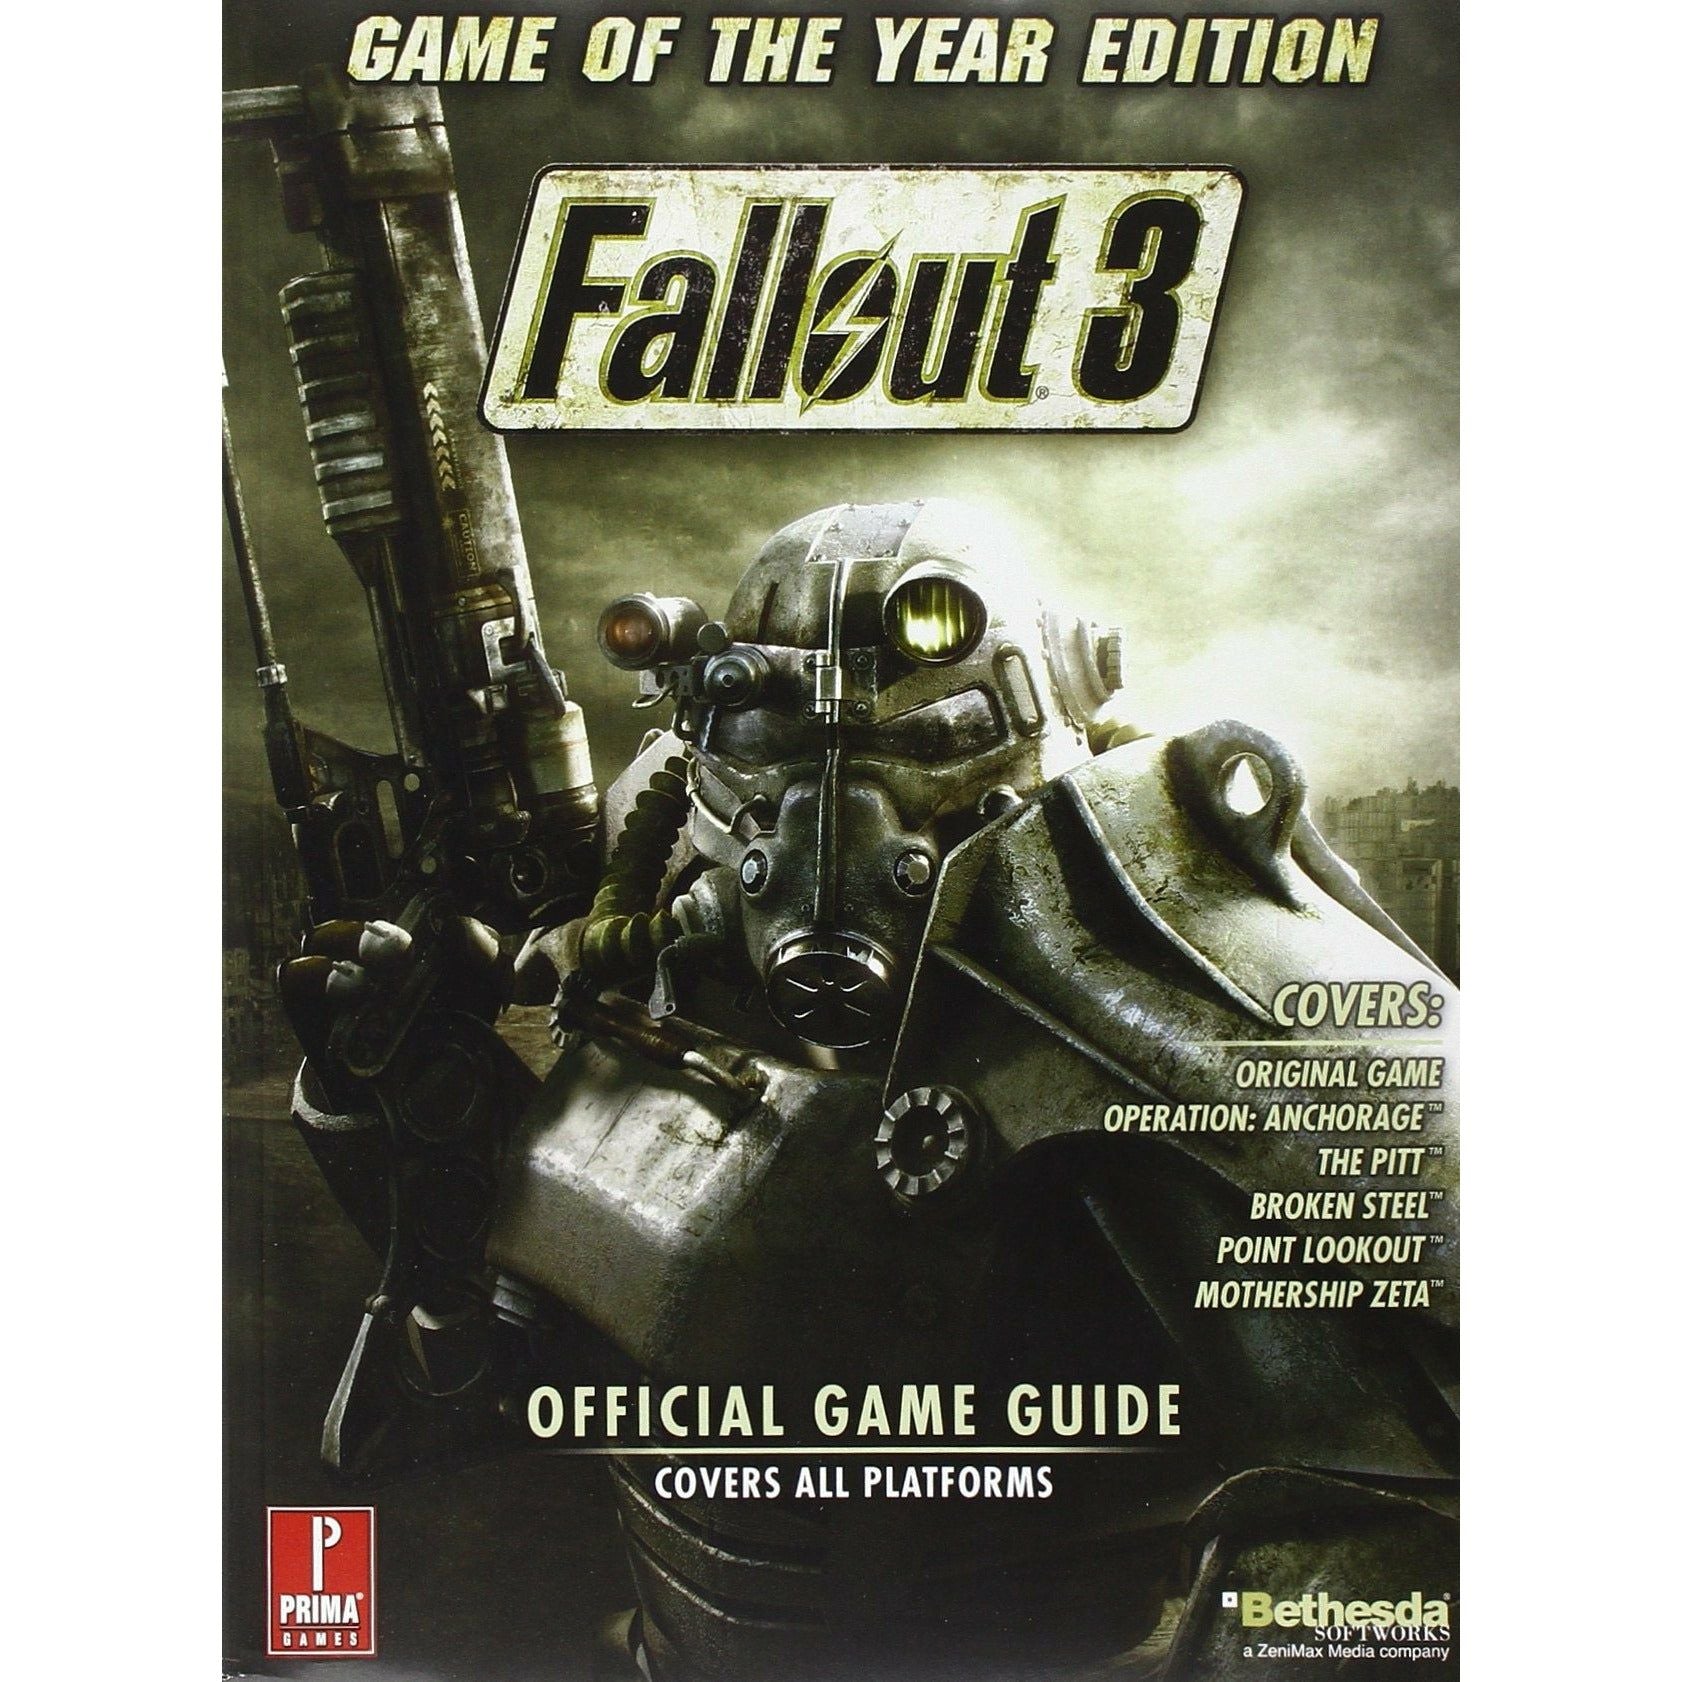 STRAT - Fallout 3 Official Game Guide - Prima